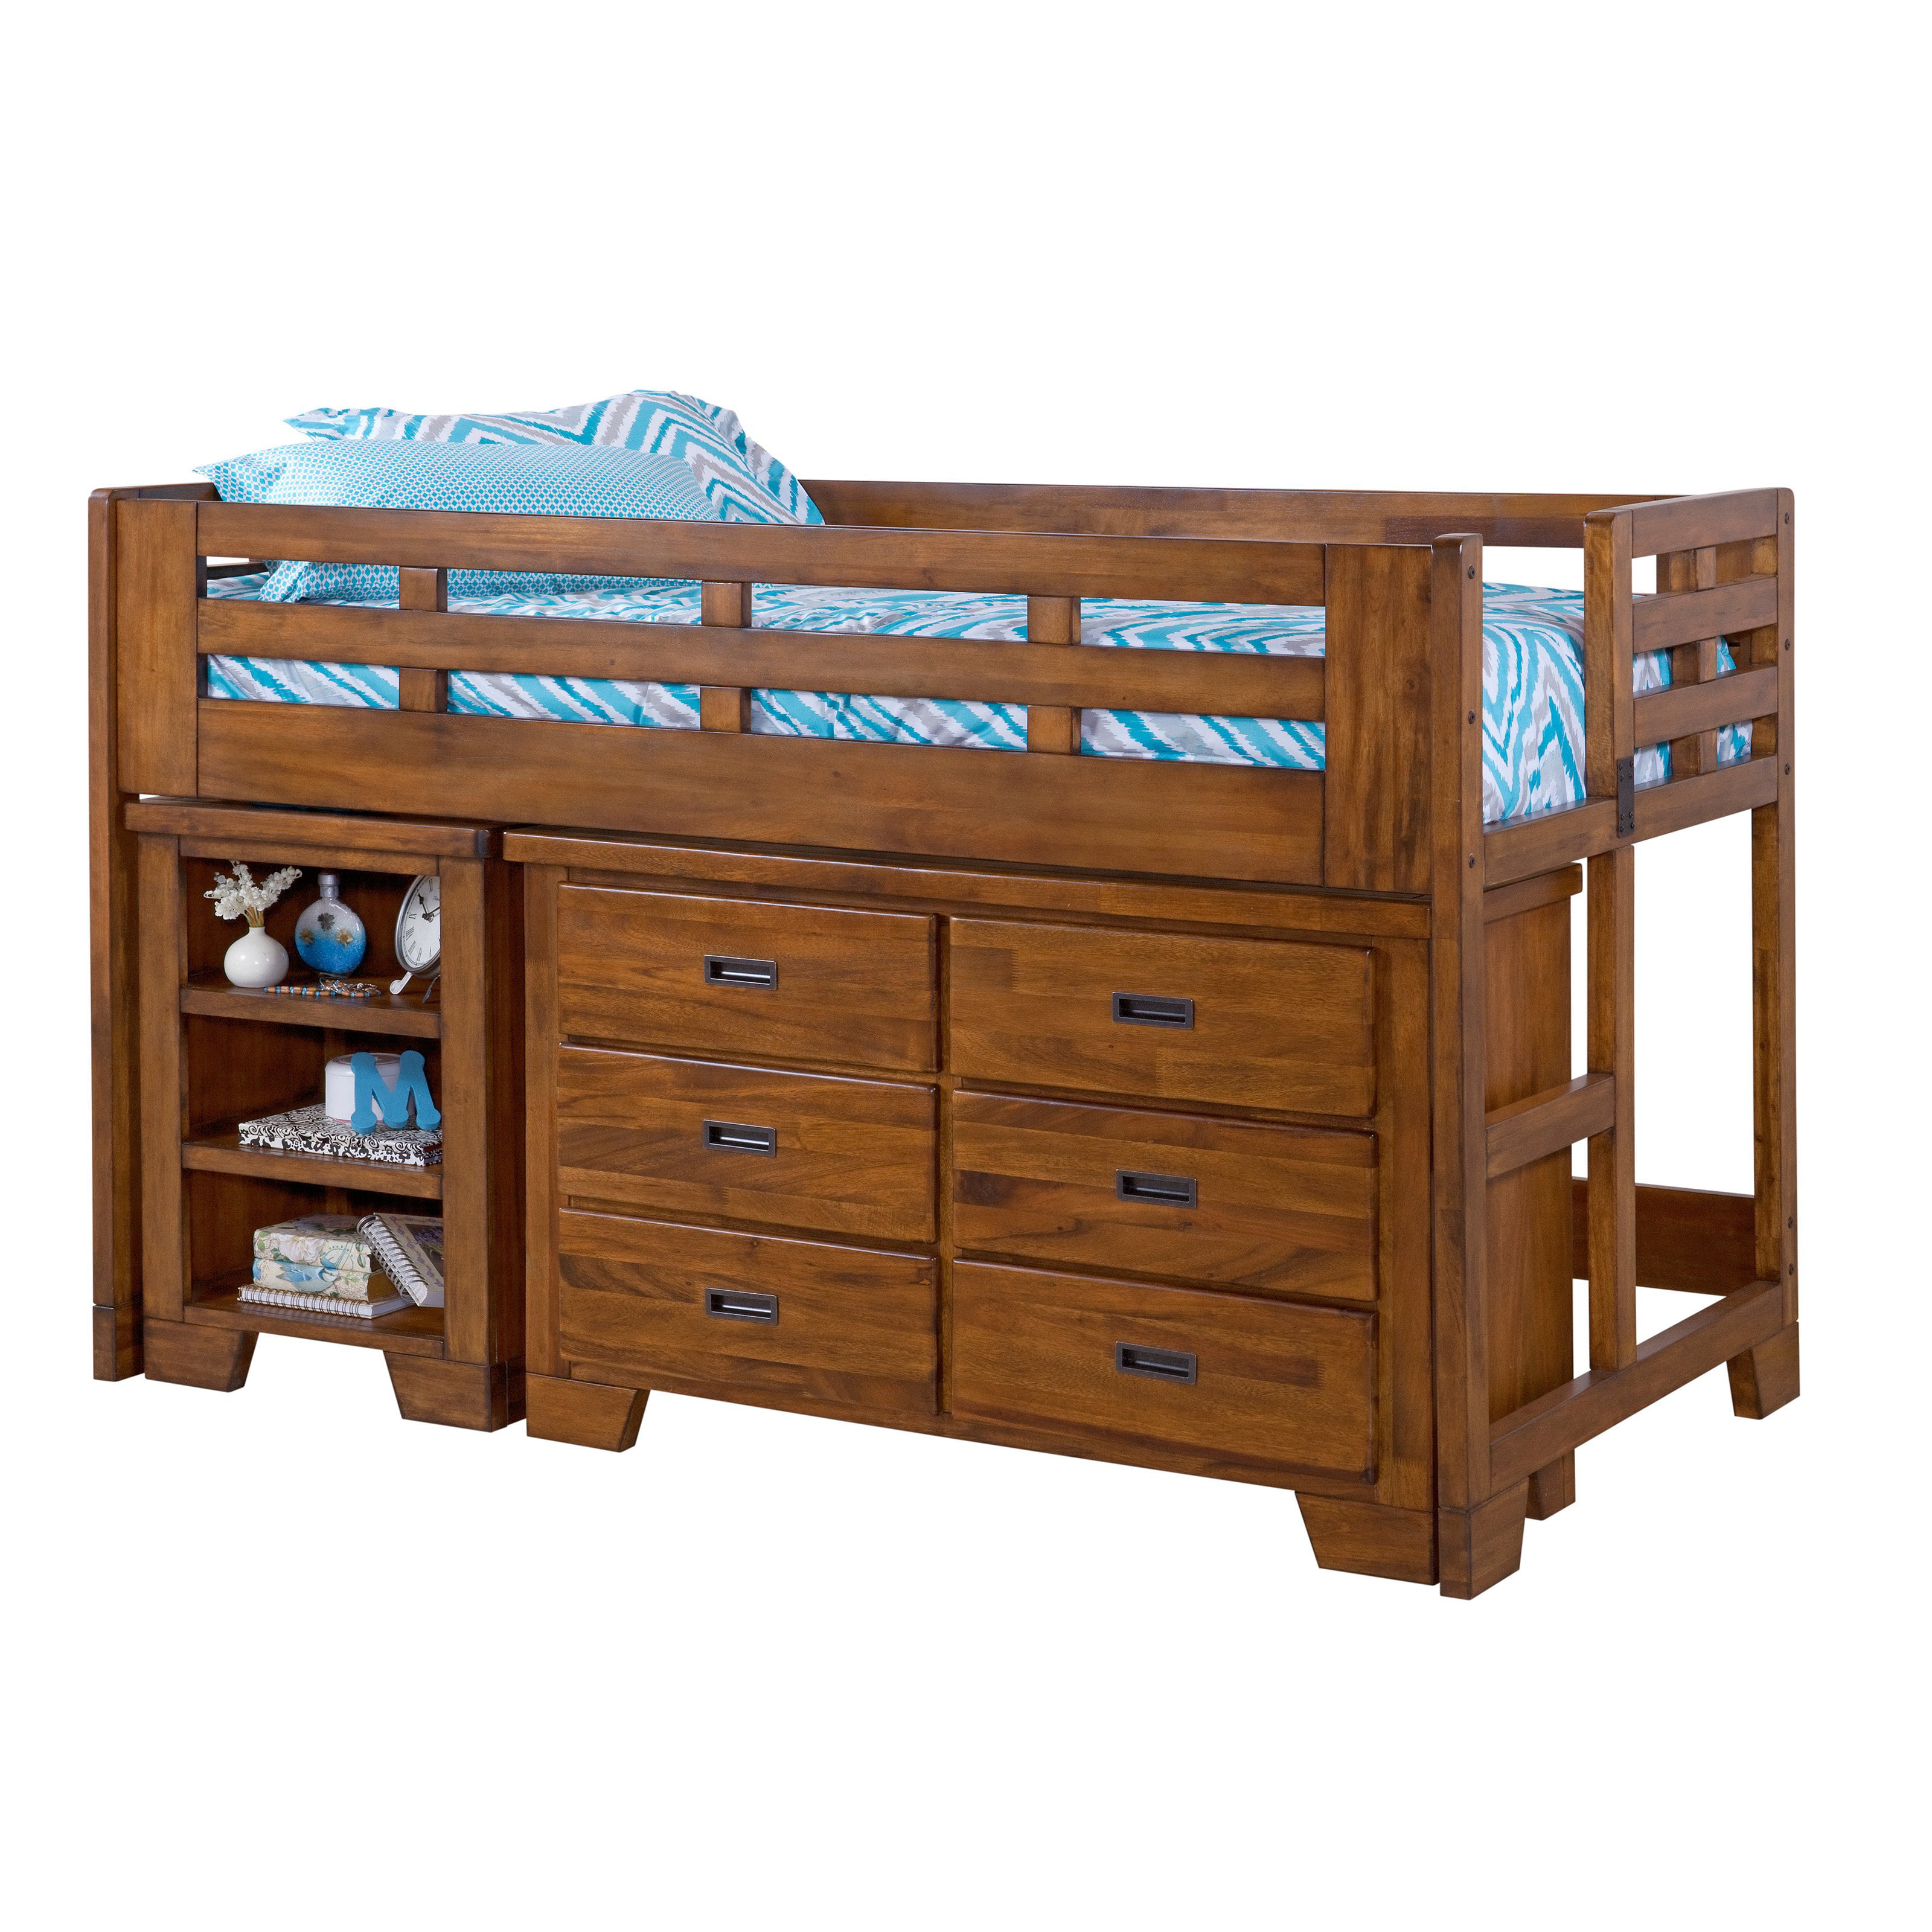 American Woodcrafters Heartland Low, American Woodcrafters Loft Bed